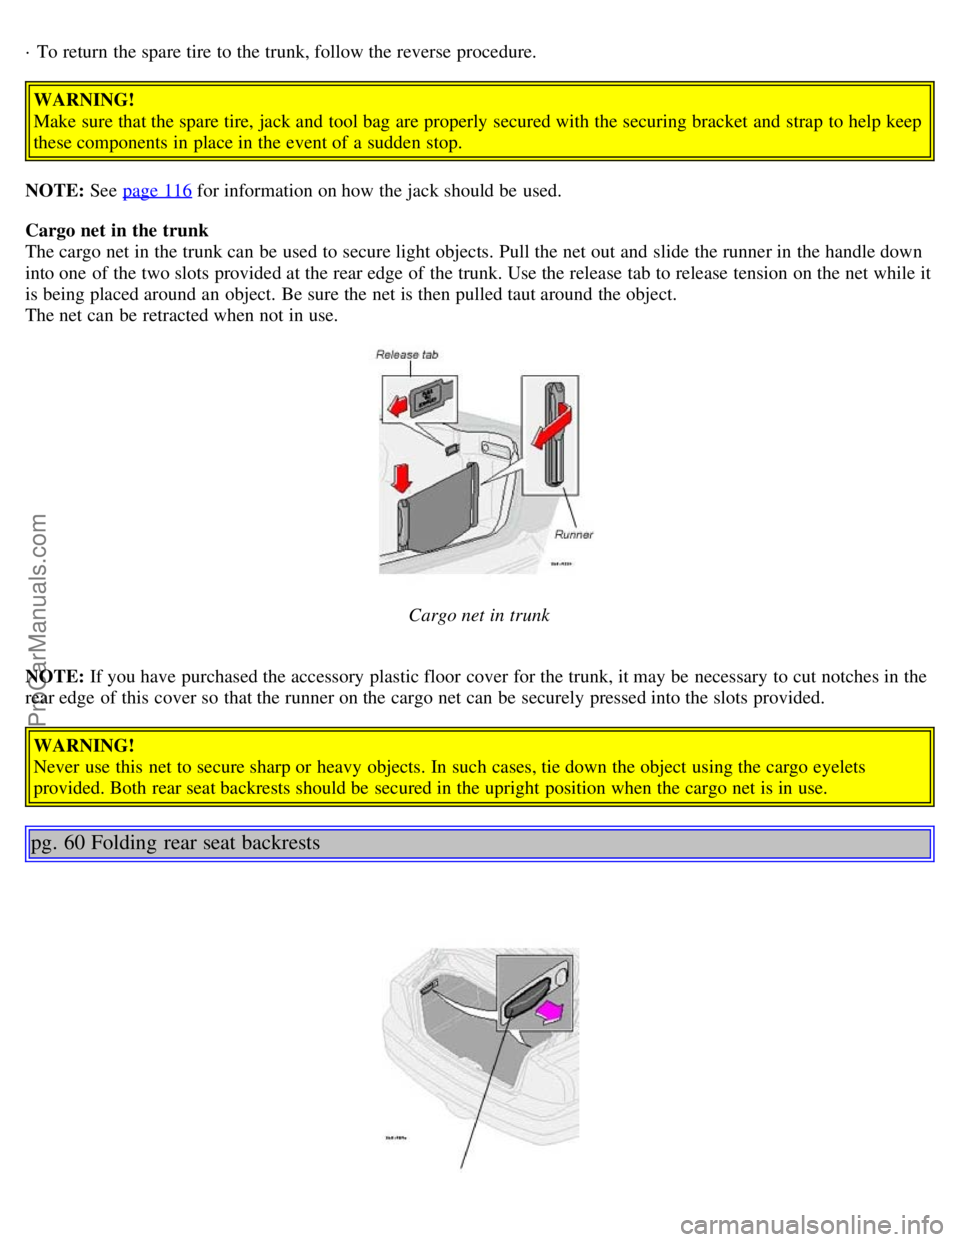 VOLVO S80 2006  Owners Manual · To return the spare tire to the trunk, follow the reverse  procedure.
WARNING!
Make sure that the spare tire, jack and  tool bag  are properly secured with the securing bracket  and  strap  to help